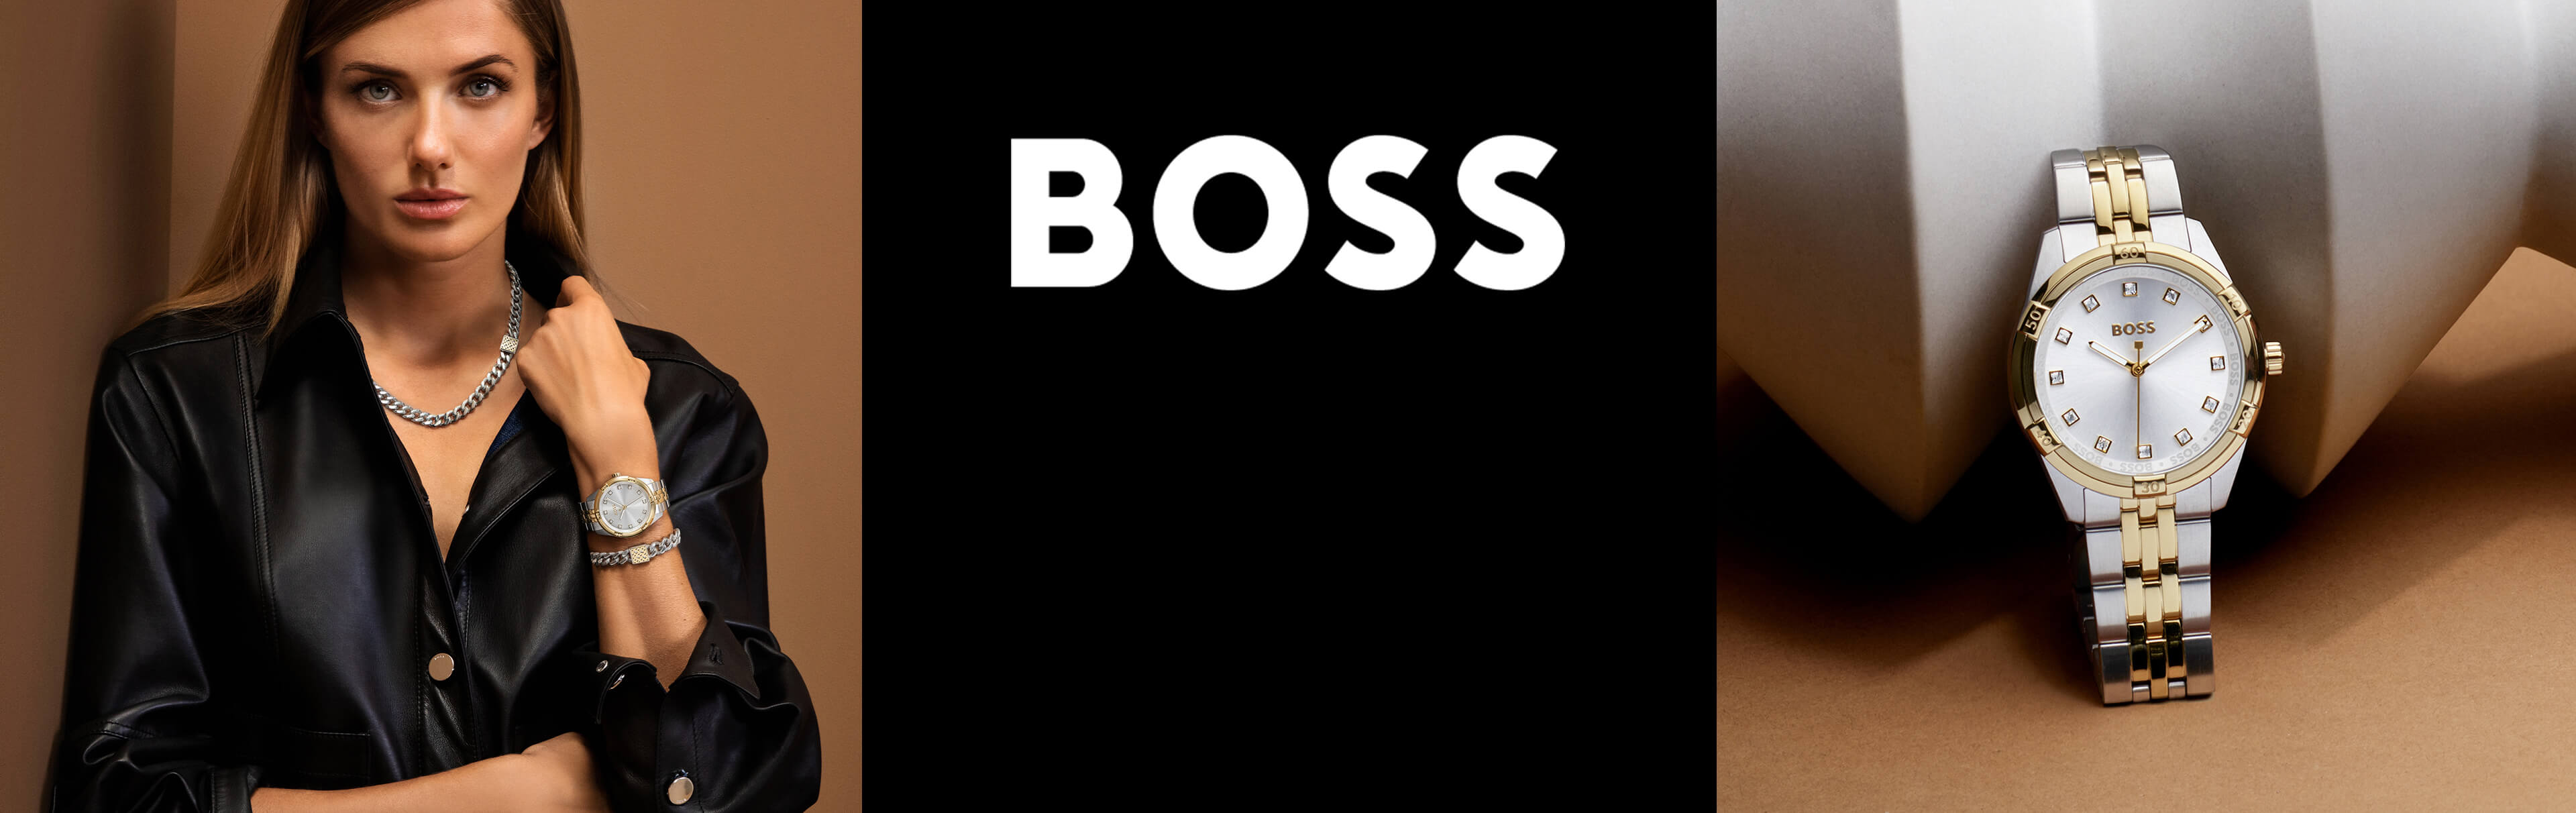 BOSS and Watches |